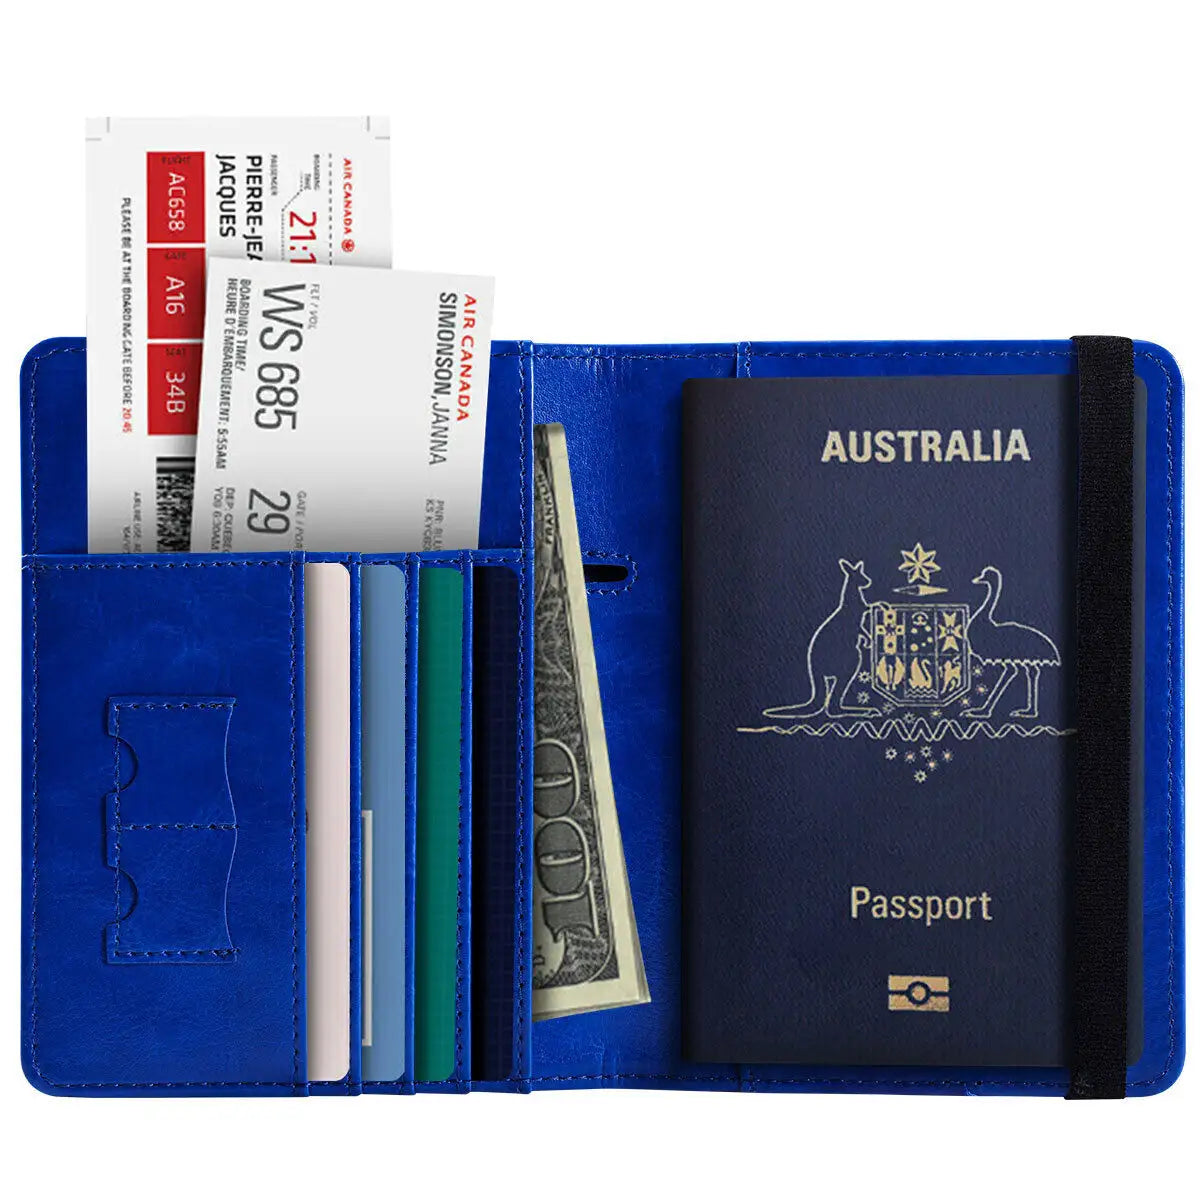 Blue RFID travel wallet with boarding pass, cash, credit cards & passport